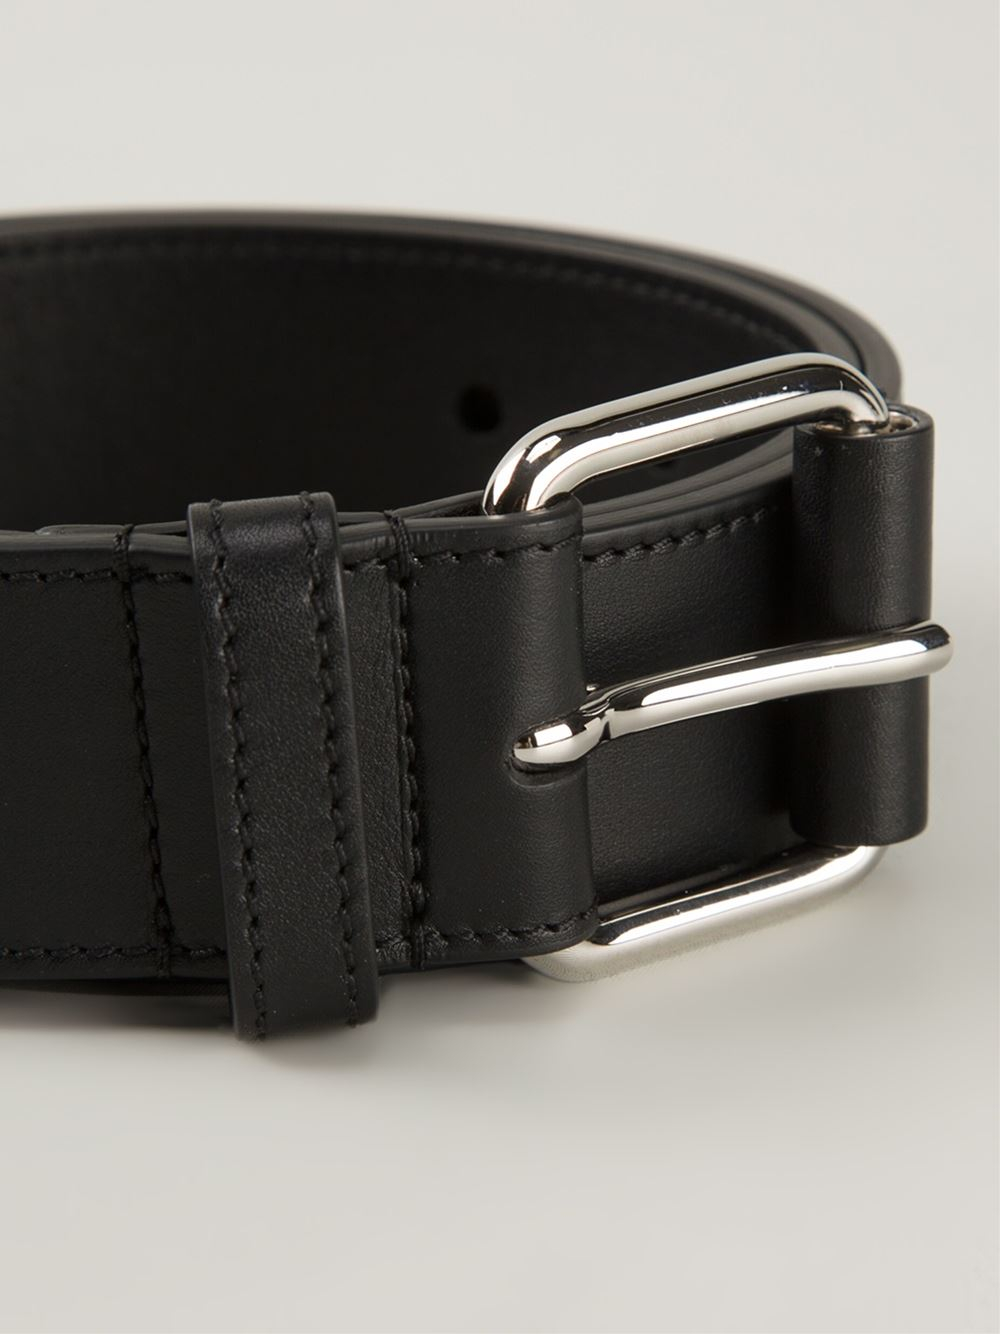 Givenchy Classic Belt in Black | Lyst